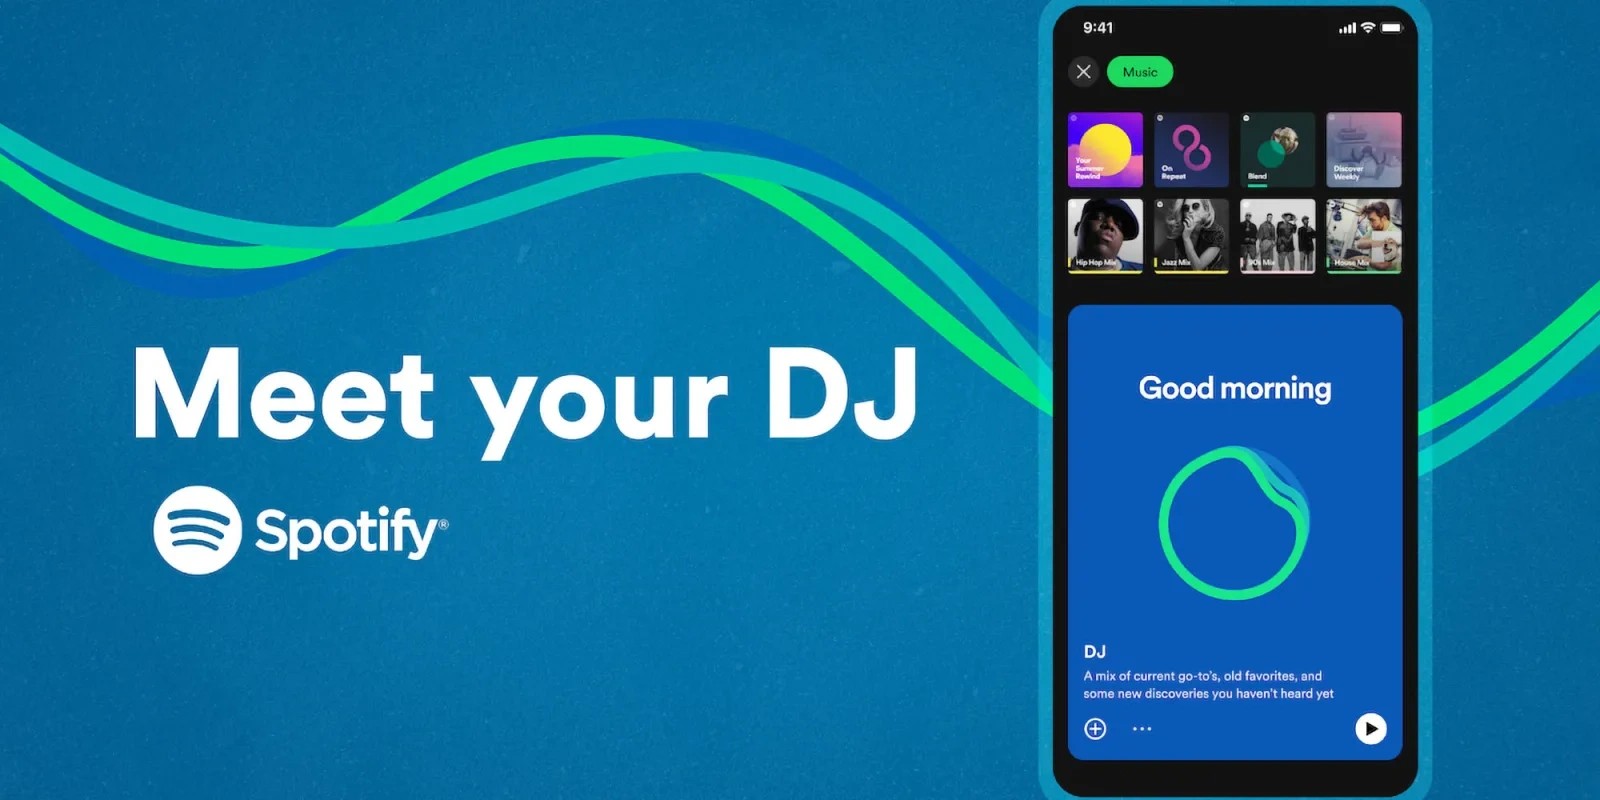 Spotify introduces new AI DJ feature